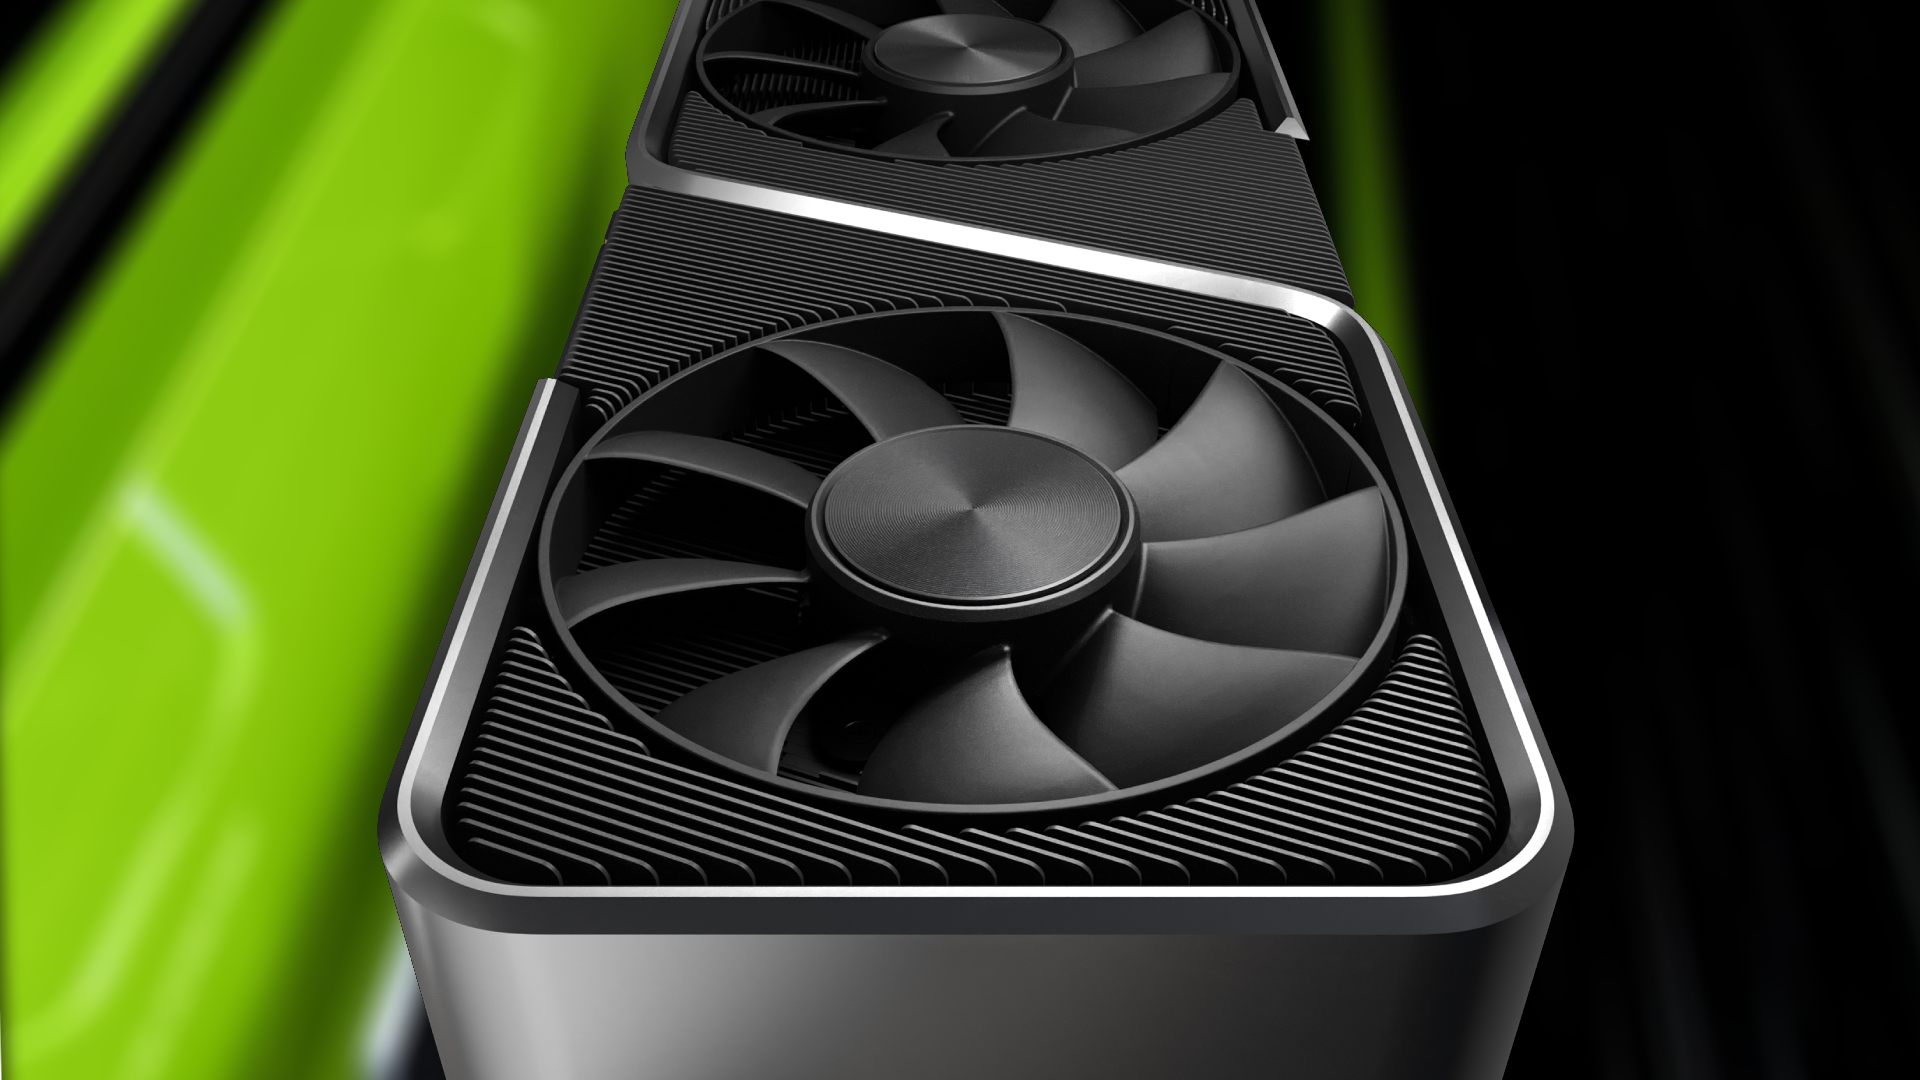 Nvidia RTX 4070 graphics card could be on shelves by April